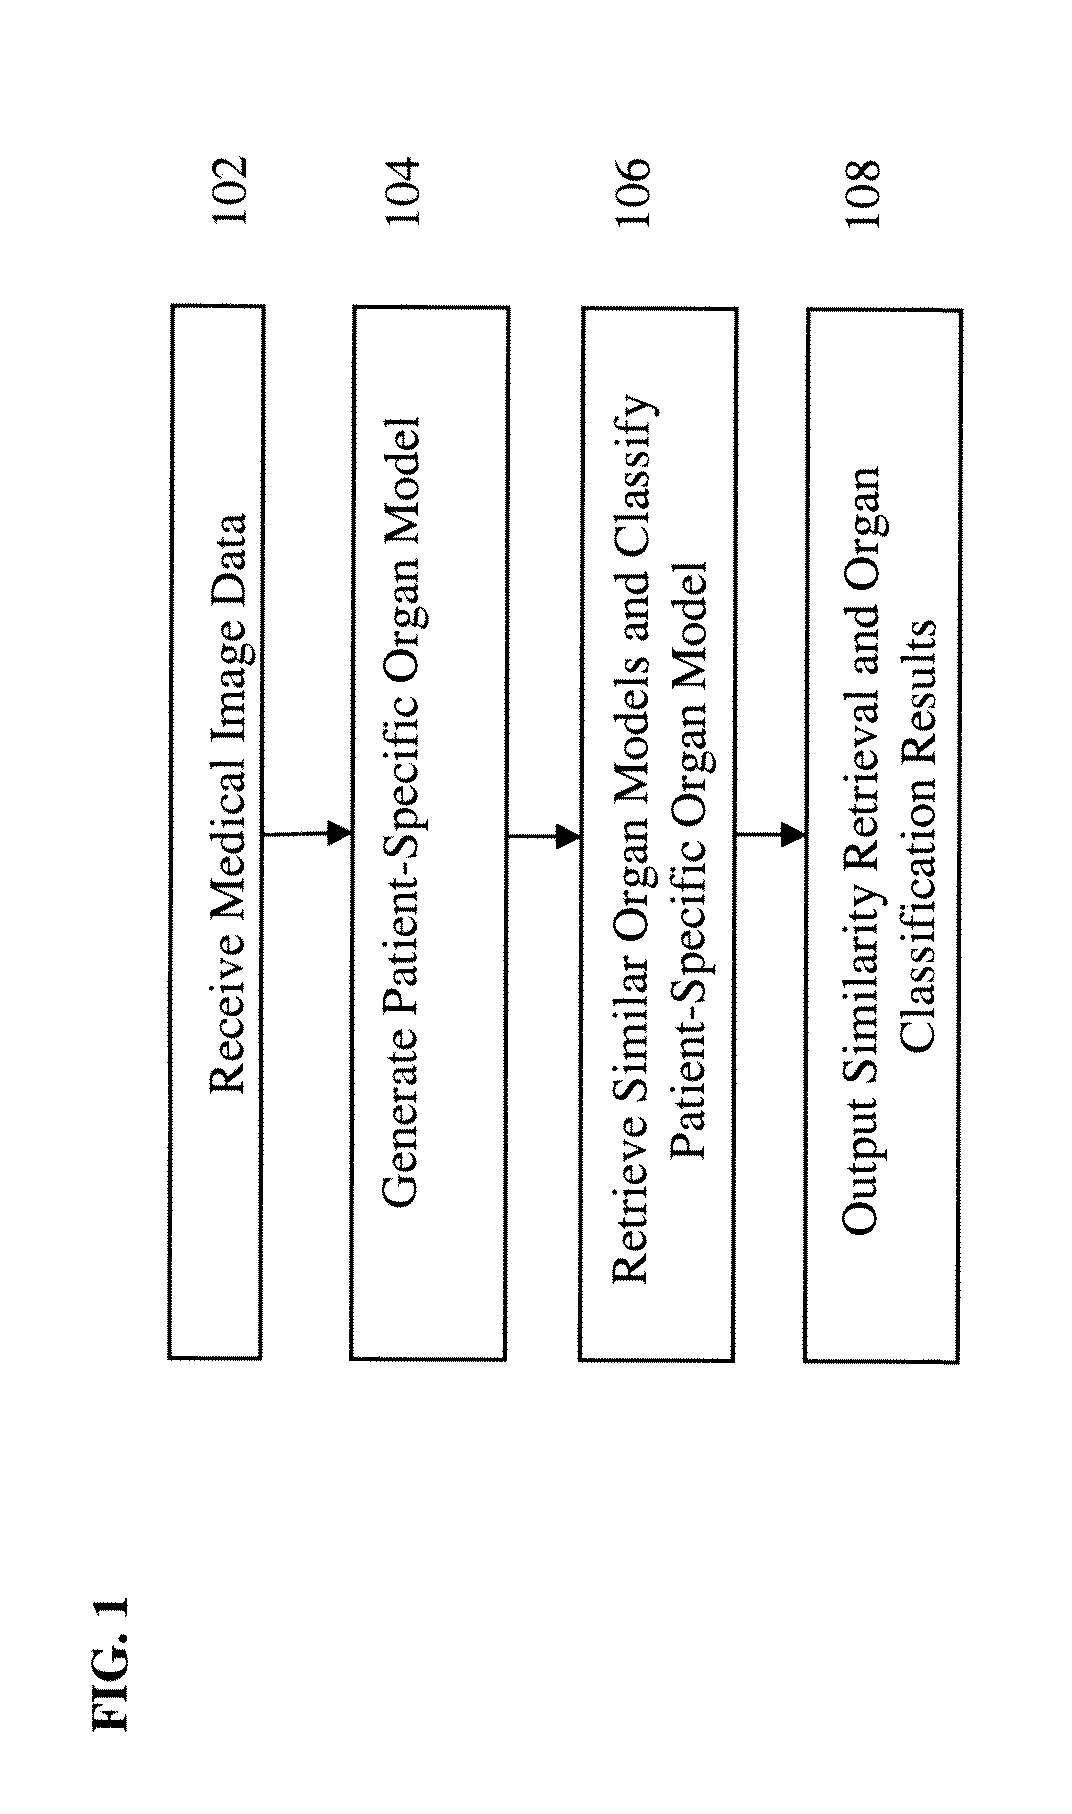 Method and System for Medical Decision Support Using Organ Models and Learning Based Discriminative Distance Functions